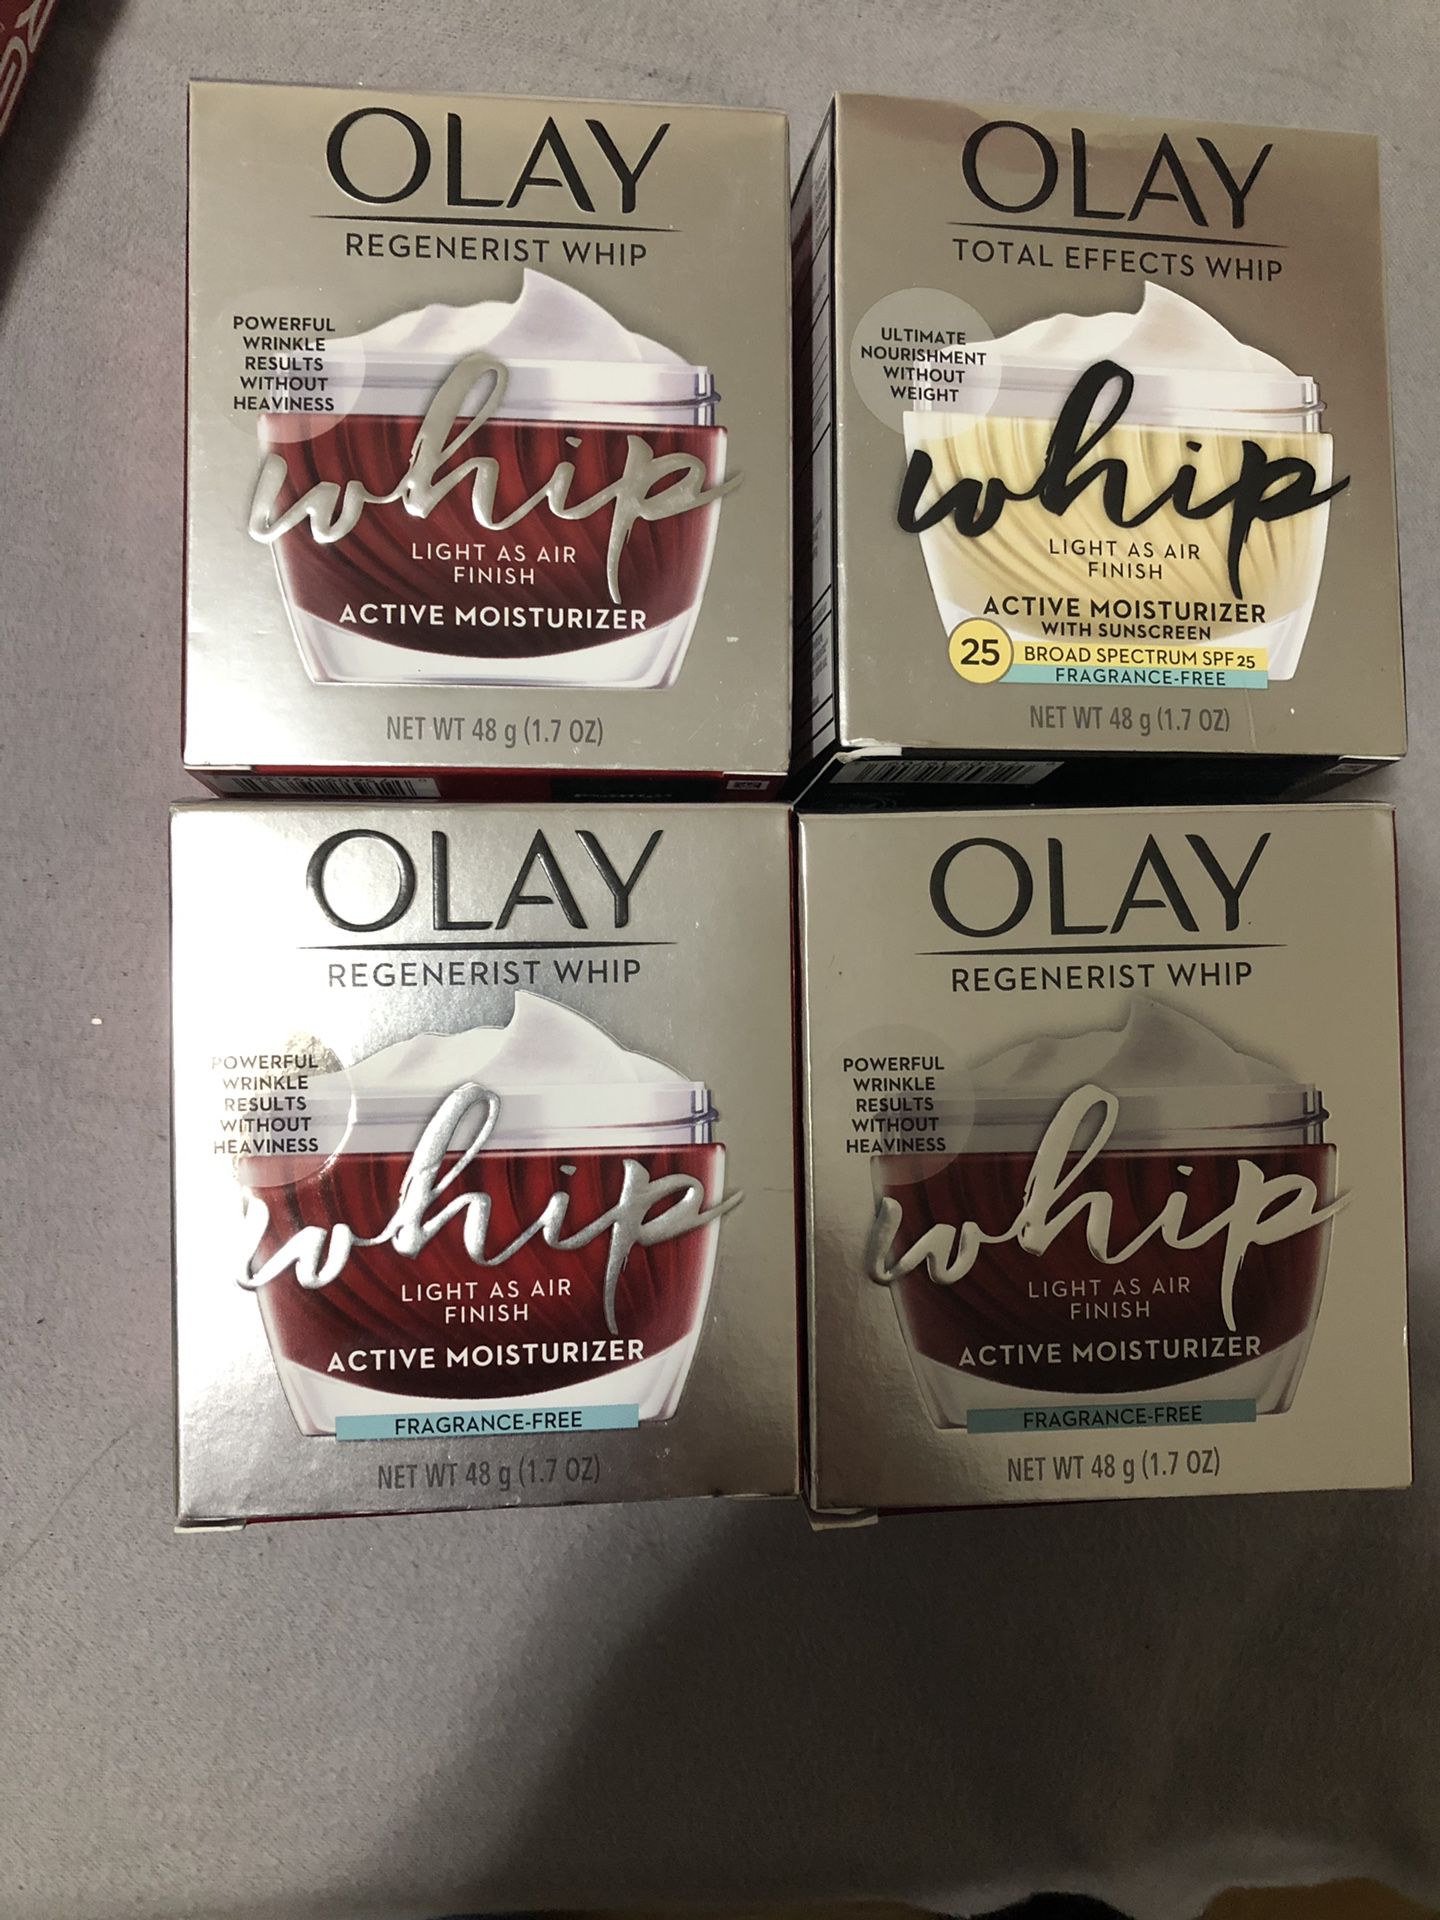 Olay Total Effects whip